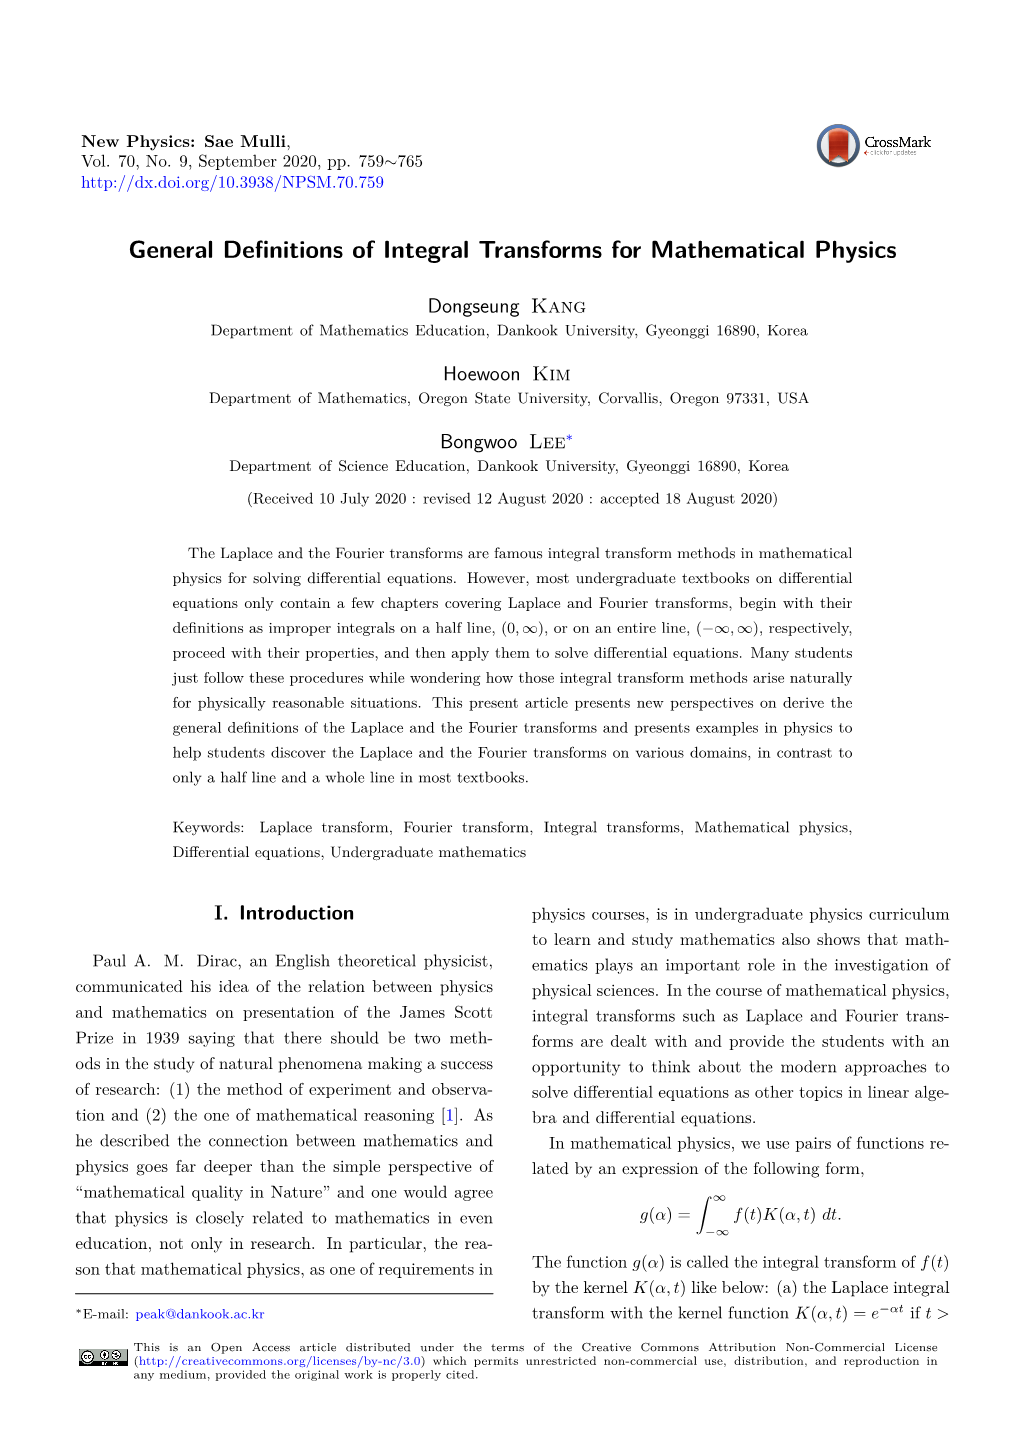 General Definitions of Integral Transforms for Mathematical Physics